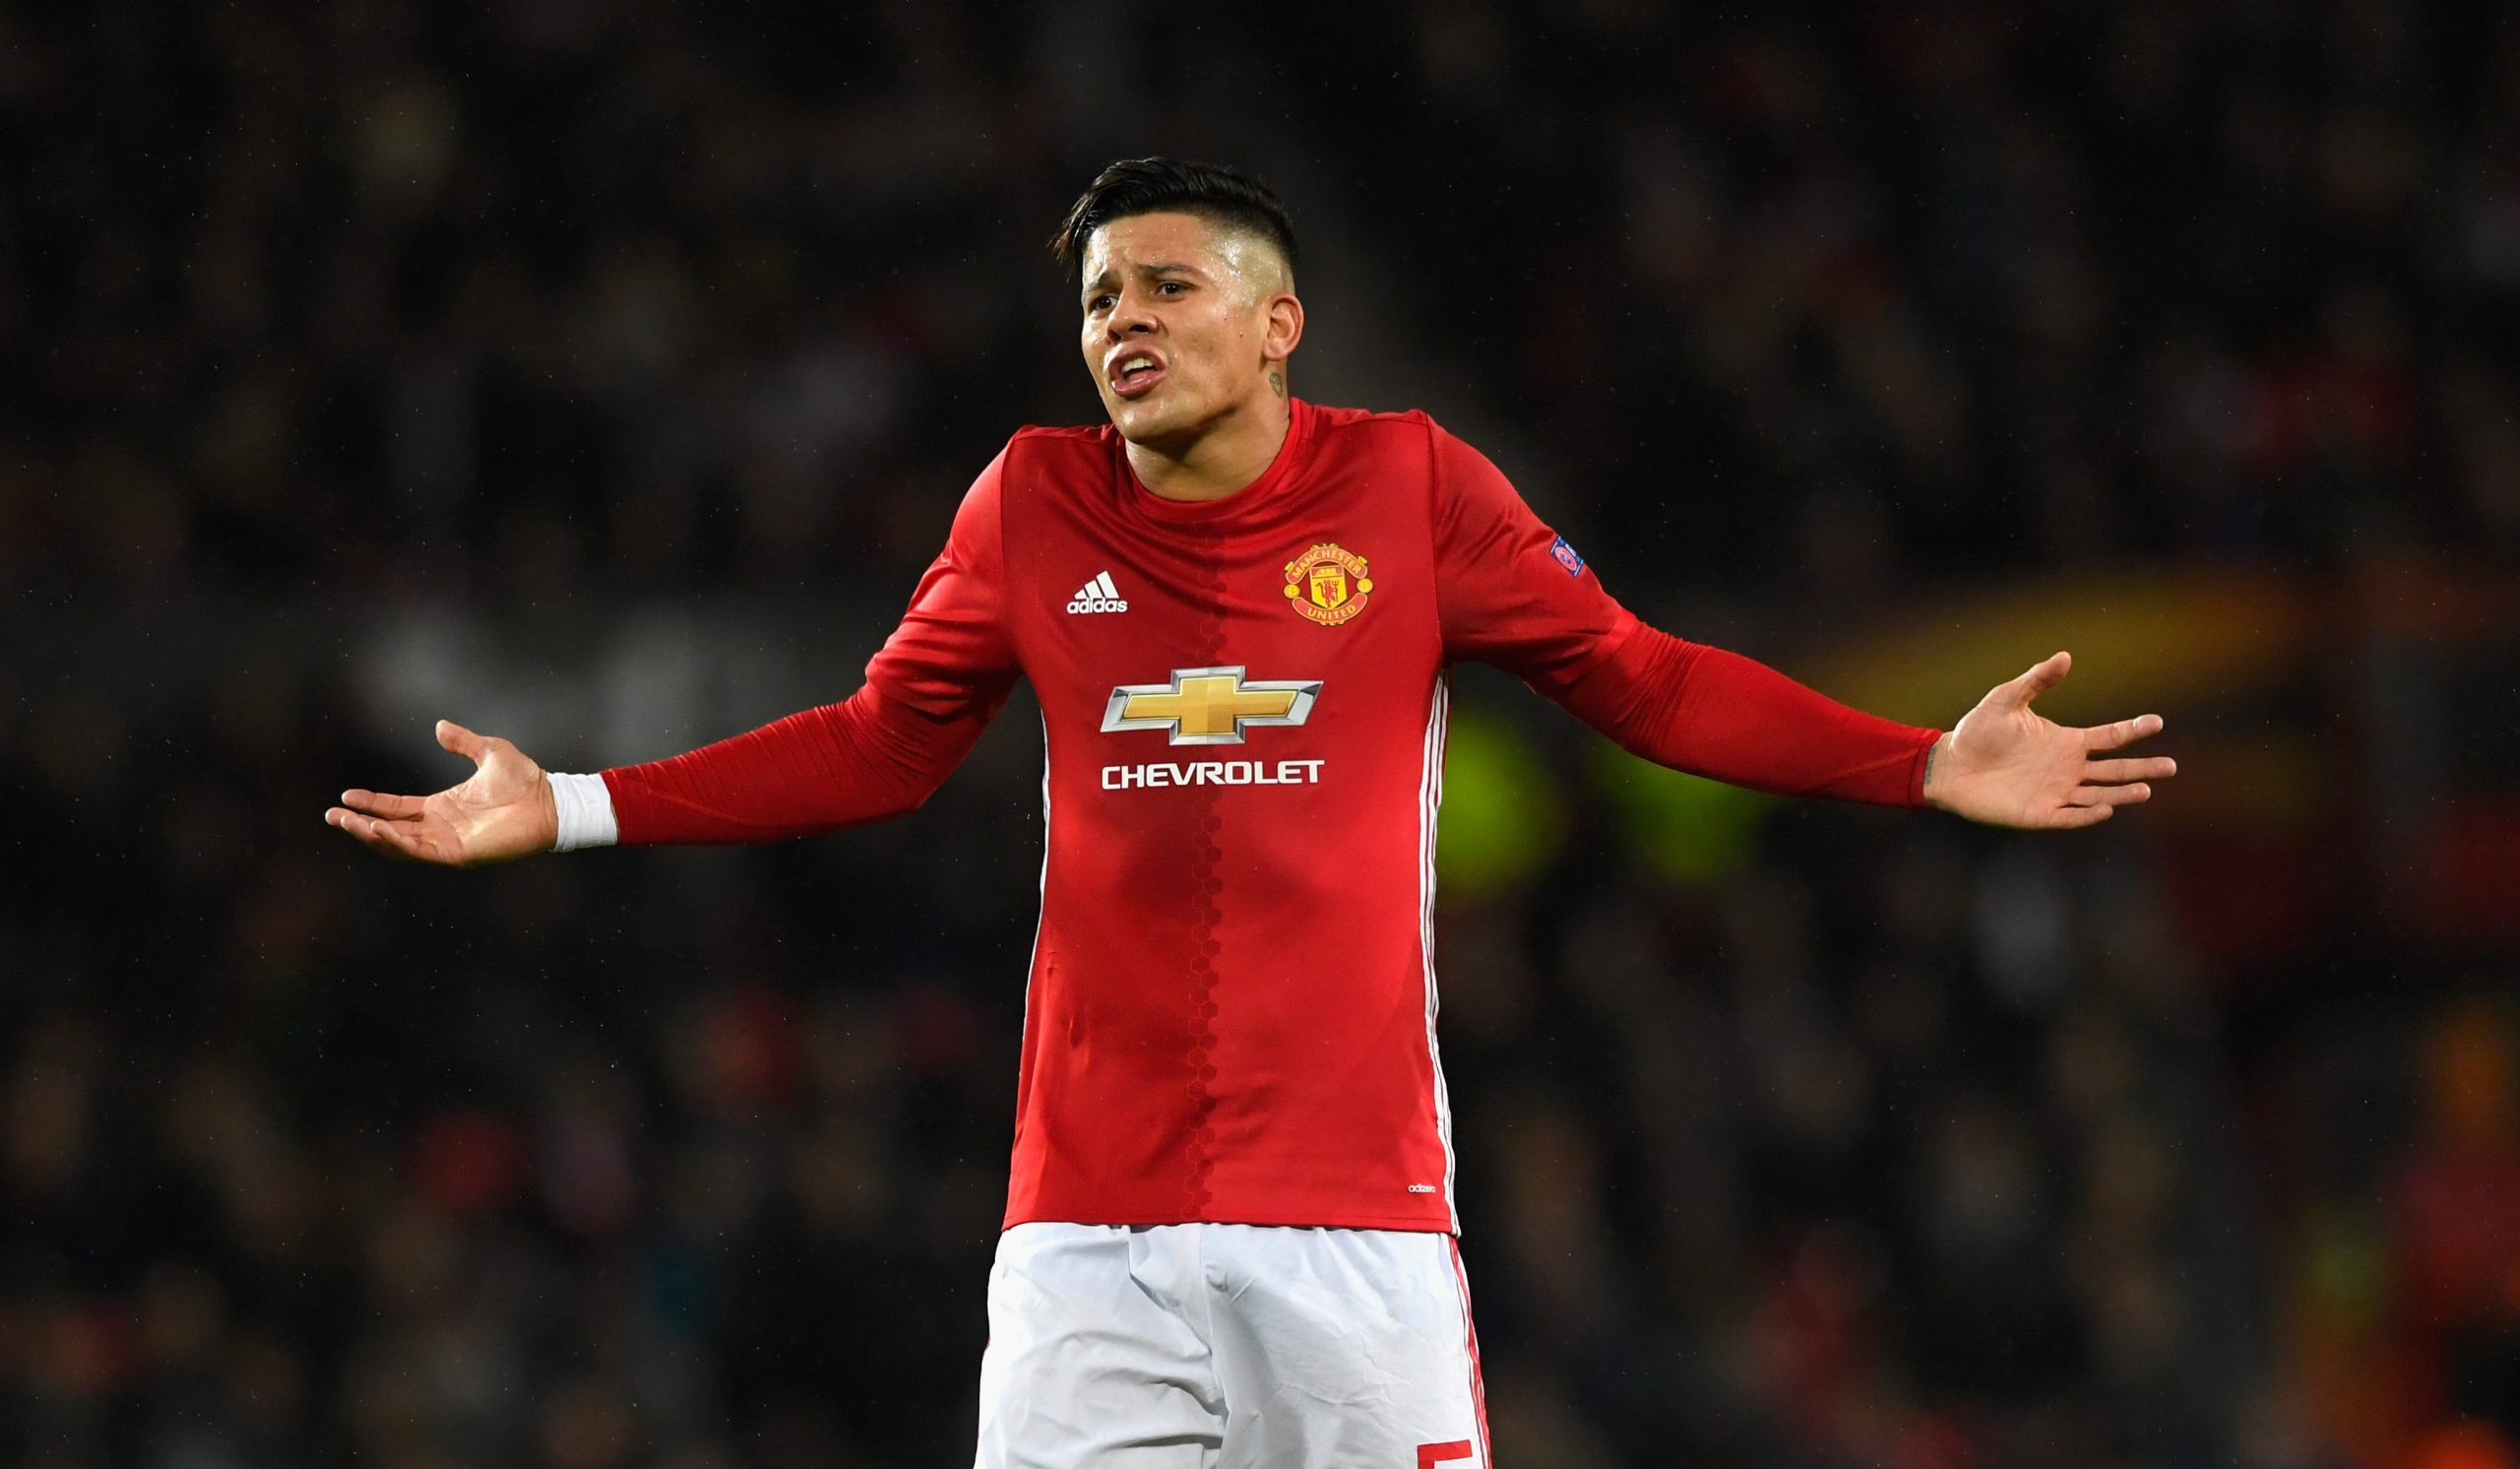 Marcos Rojo joined Boca Juniors from Manchester United in the January transfer window. (GETTY Images)